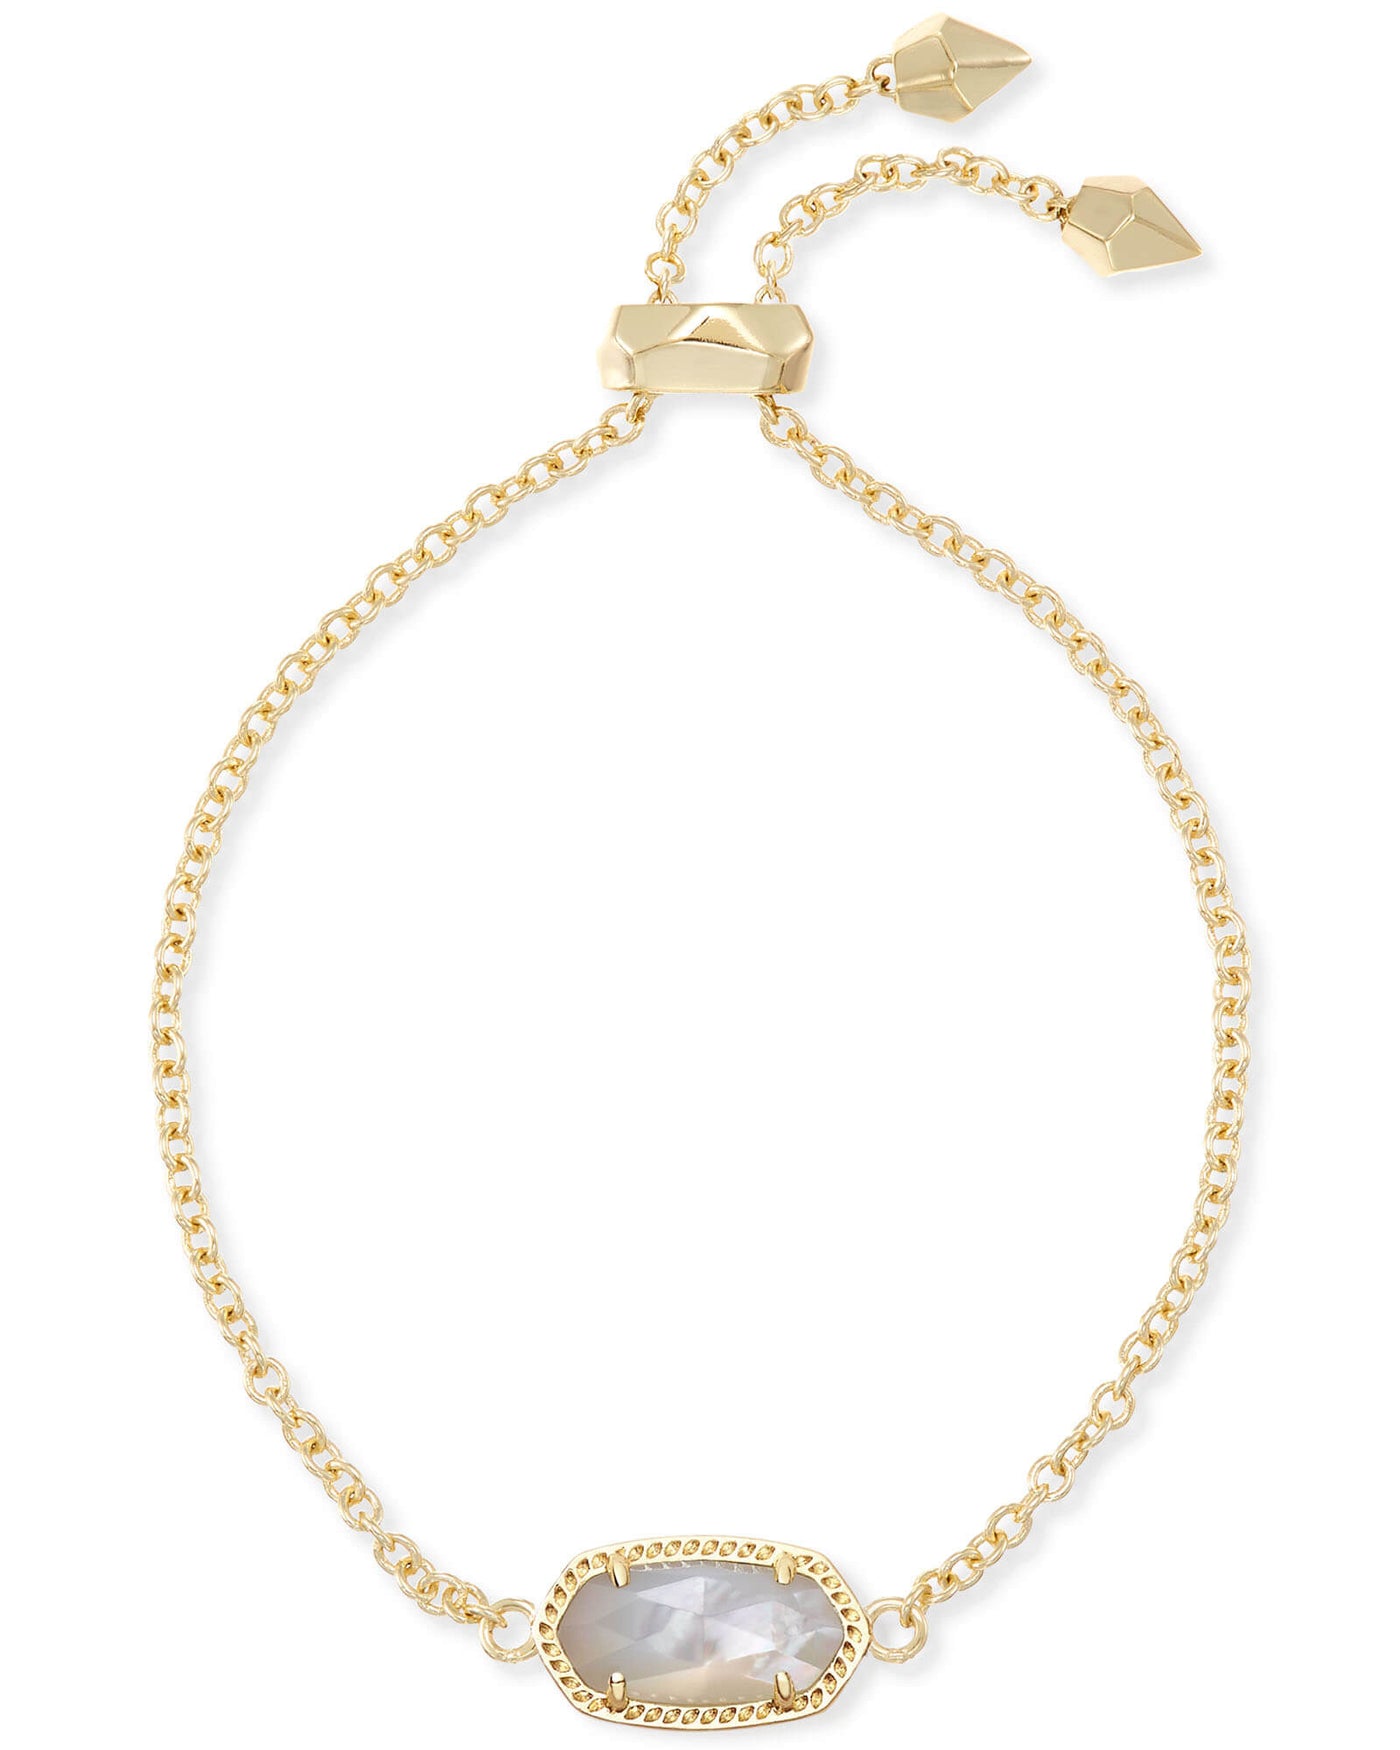 Kendra Scott Elaina Gold Adjustable Chain Bracelet in Ivory Mother of Pearl-Bracelets-Kendra Scott-Market Street Nest, Fashionable Clothing, Shoes and Home Décor Located in Mabank, TX